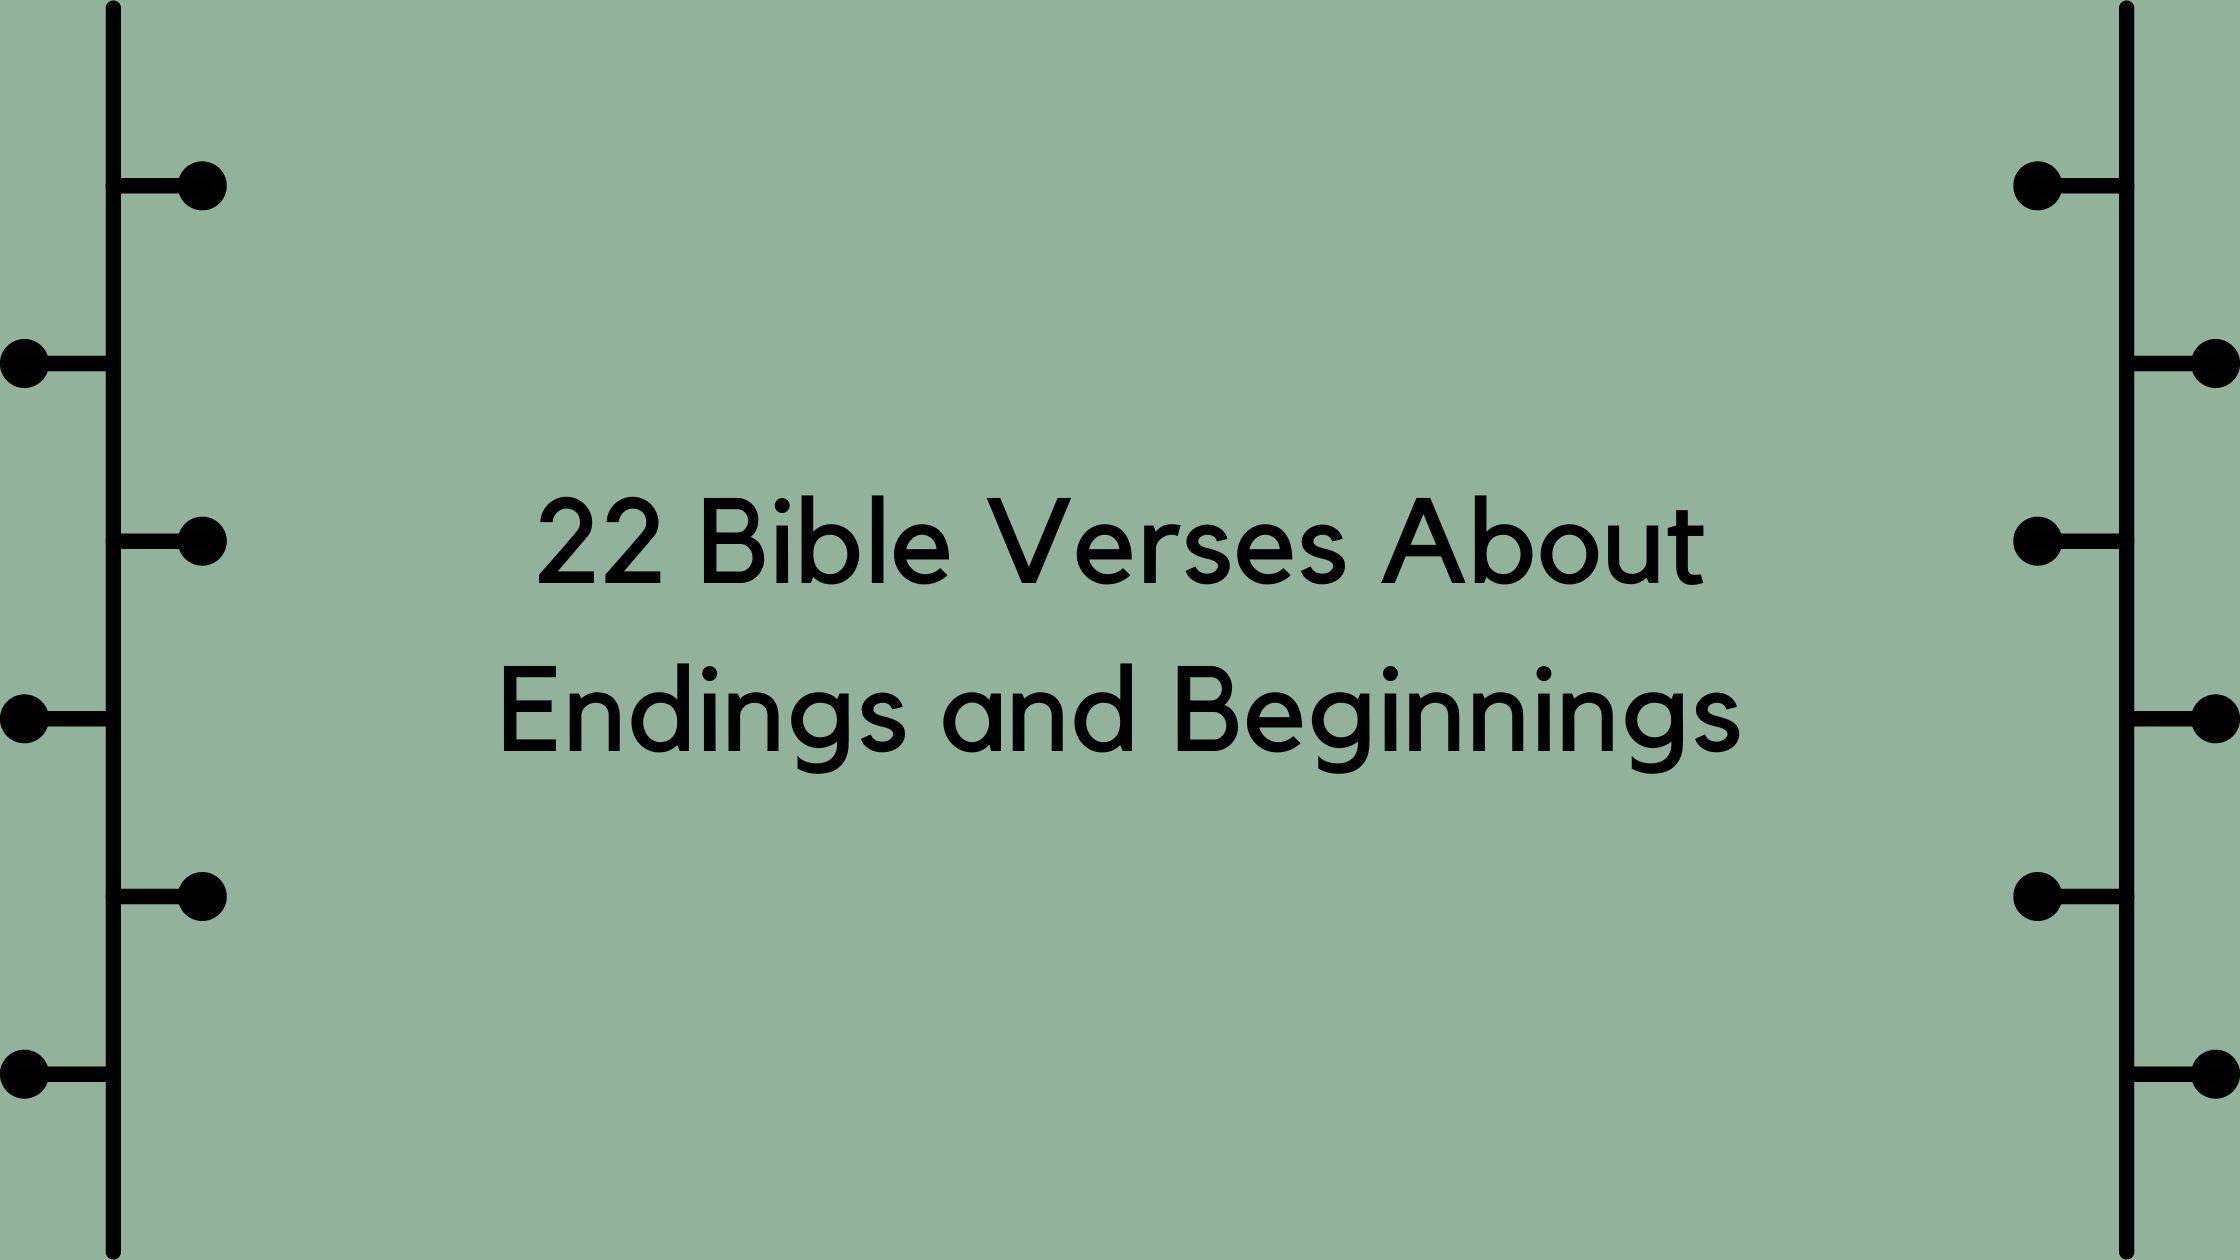 Bible Verses About Endings and Beginnings